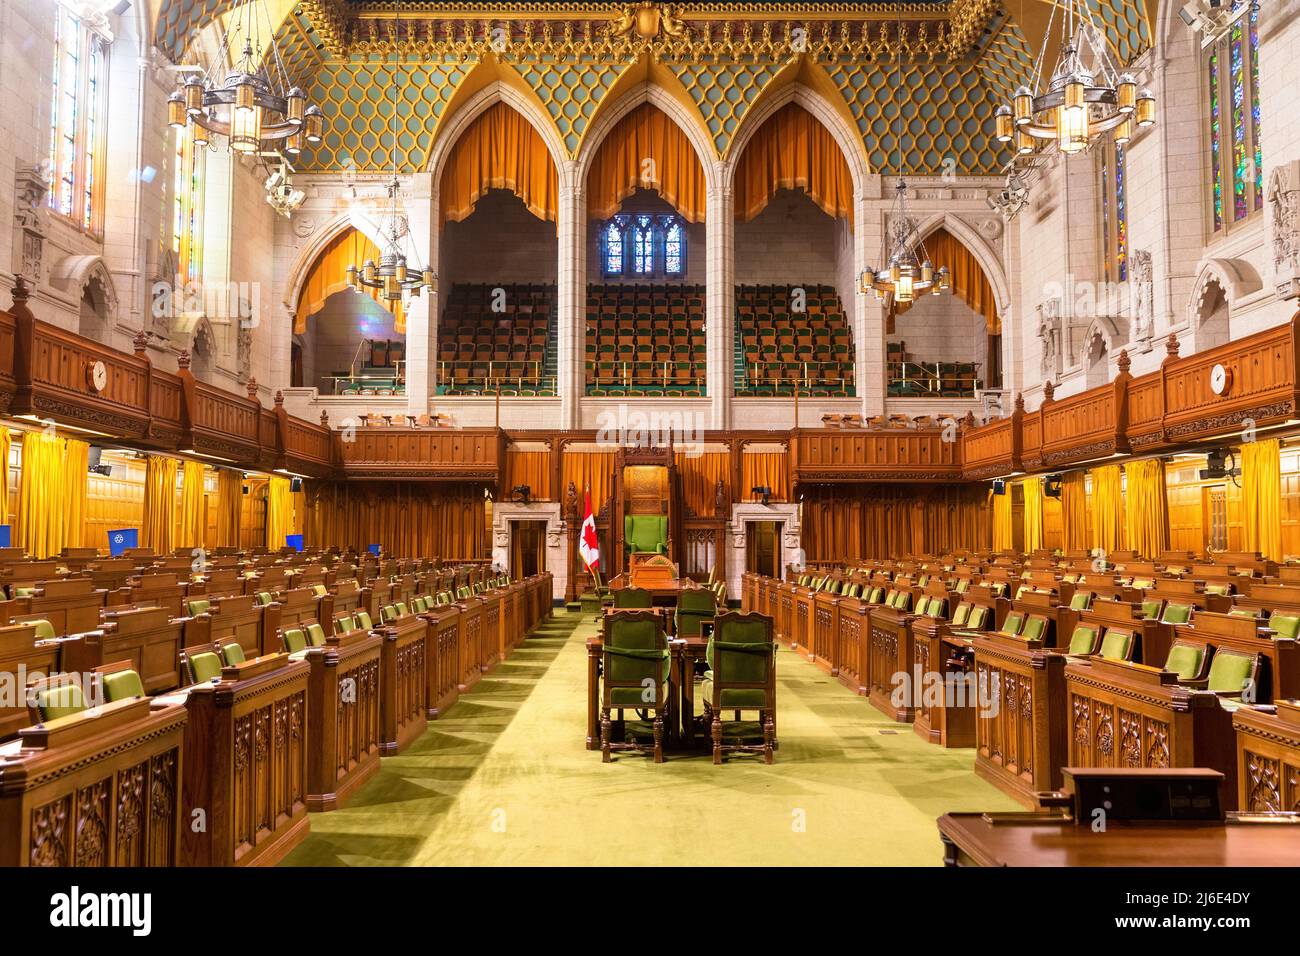 Ottawa, Canada - 20 January 2015: The interior of the House of Commons, Ottawa, Canada. The Canadian Houses of Parliament date back to 1867 and are mo Stock Photo